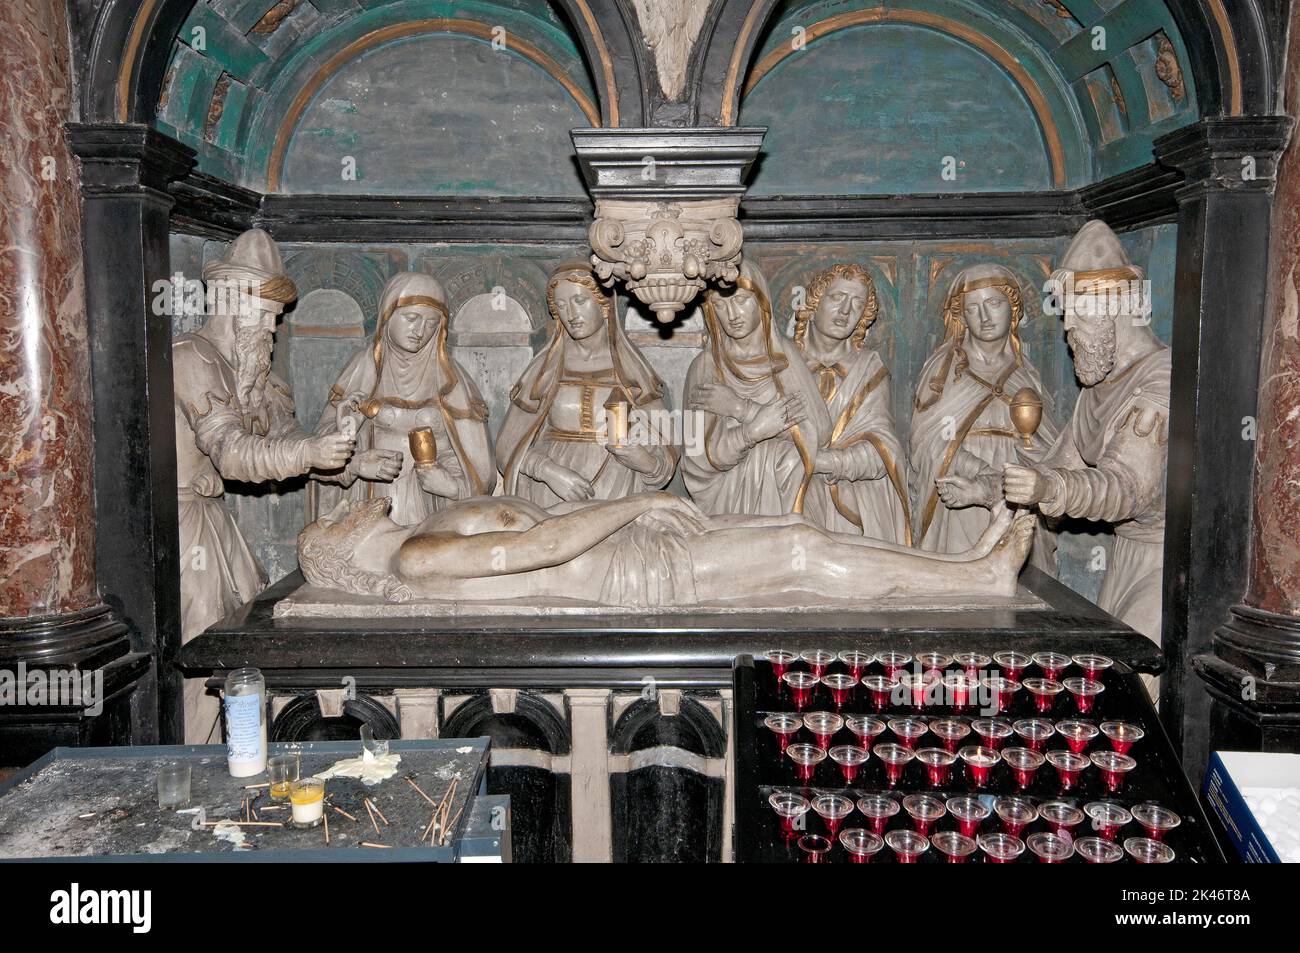 Anointment of Jesus body in the tomb, marble sculpture, Cathedral of Saints Michael and Gudula, Brussels, Belgium Stock Photo